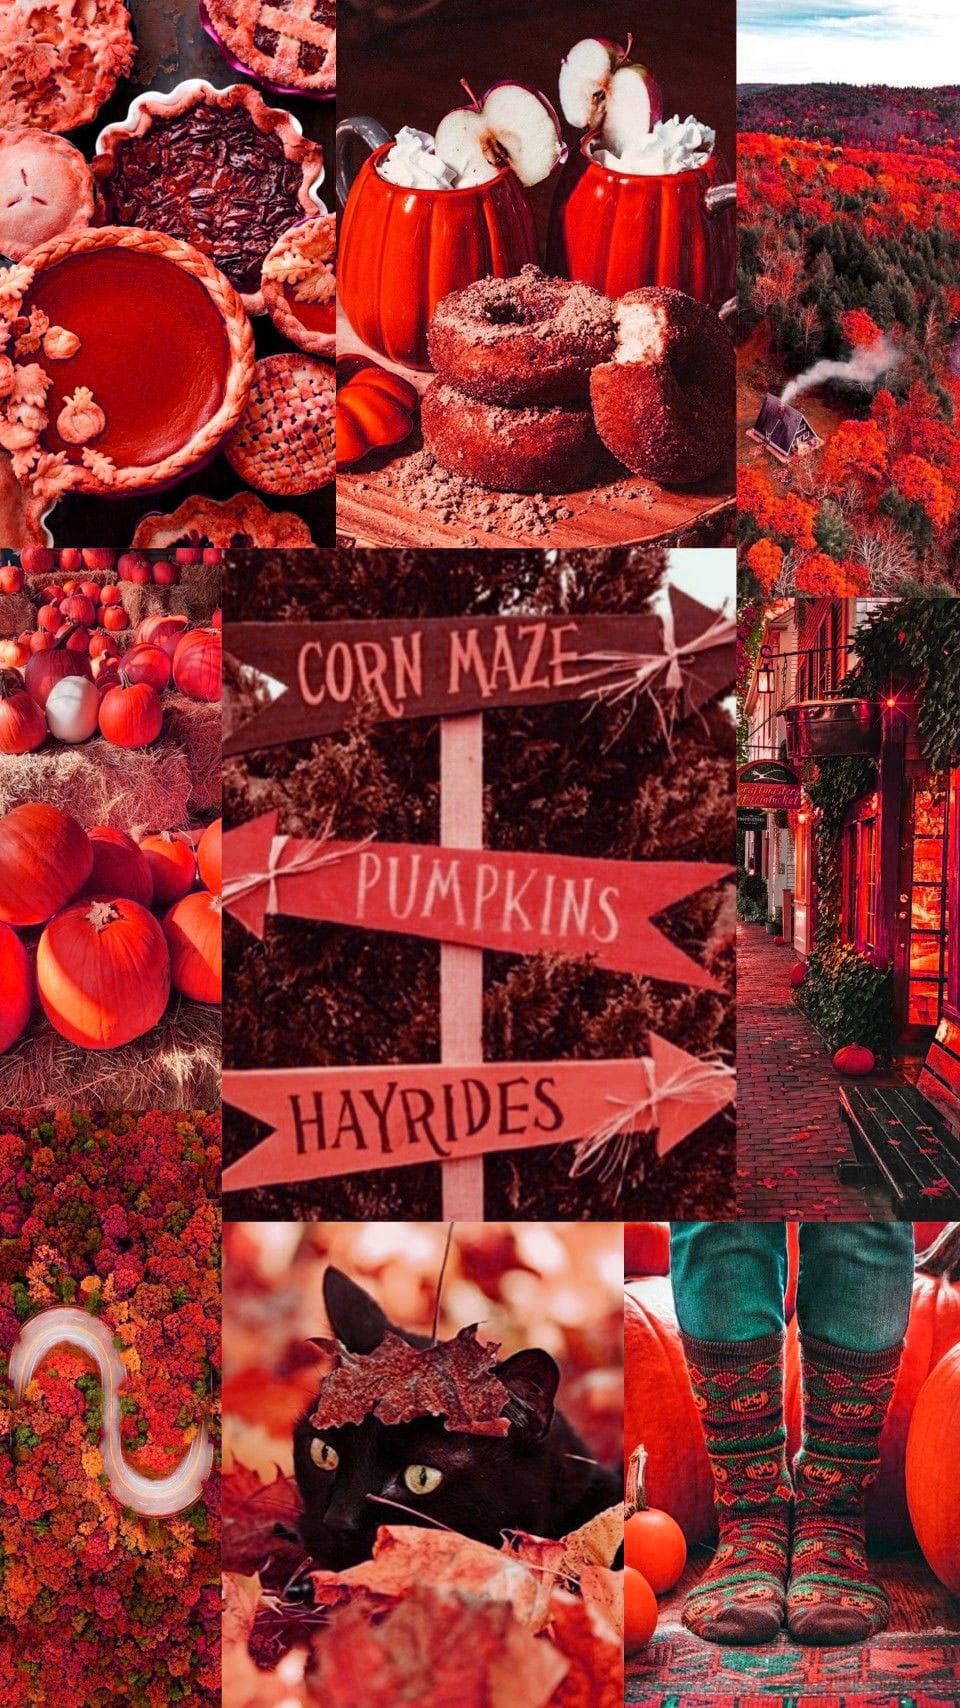 Aesthetic wallpaper background for phone, red and orange, pumpkins, fall, autumn, hayride, corn maze, apple cider, donuts, candy corn, candy apples, and Halloween. - Cozy, Gryffindor